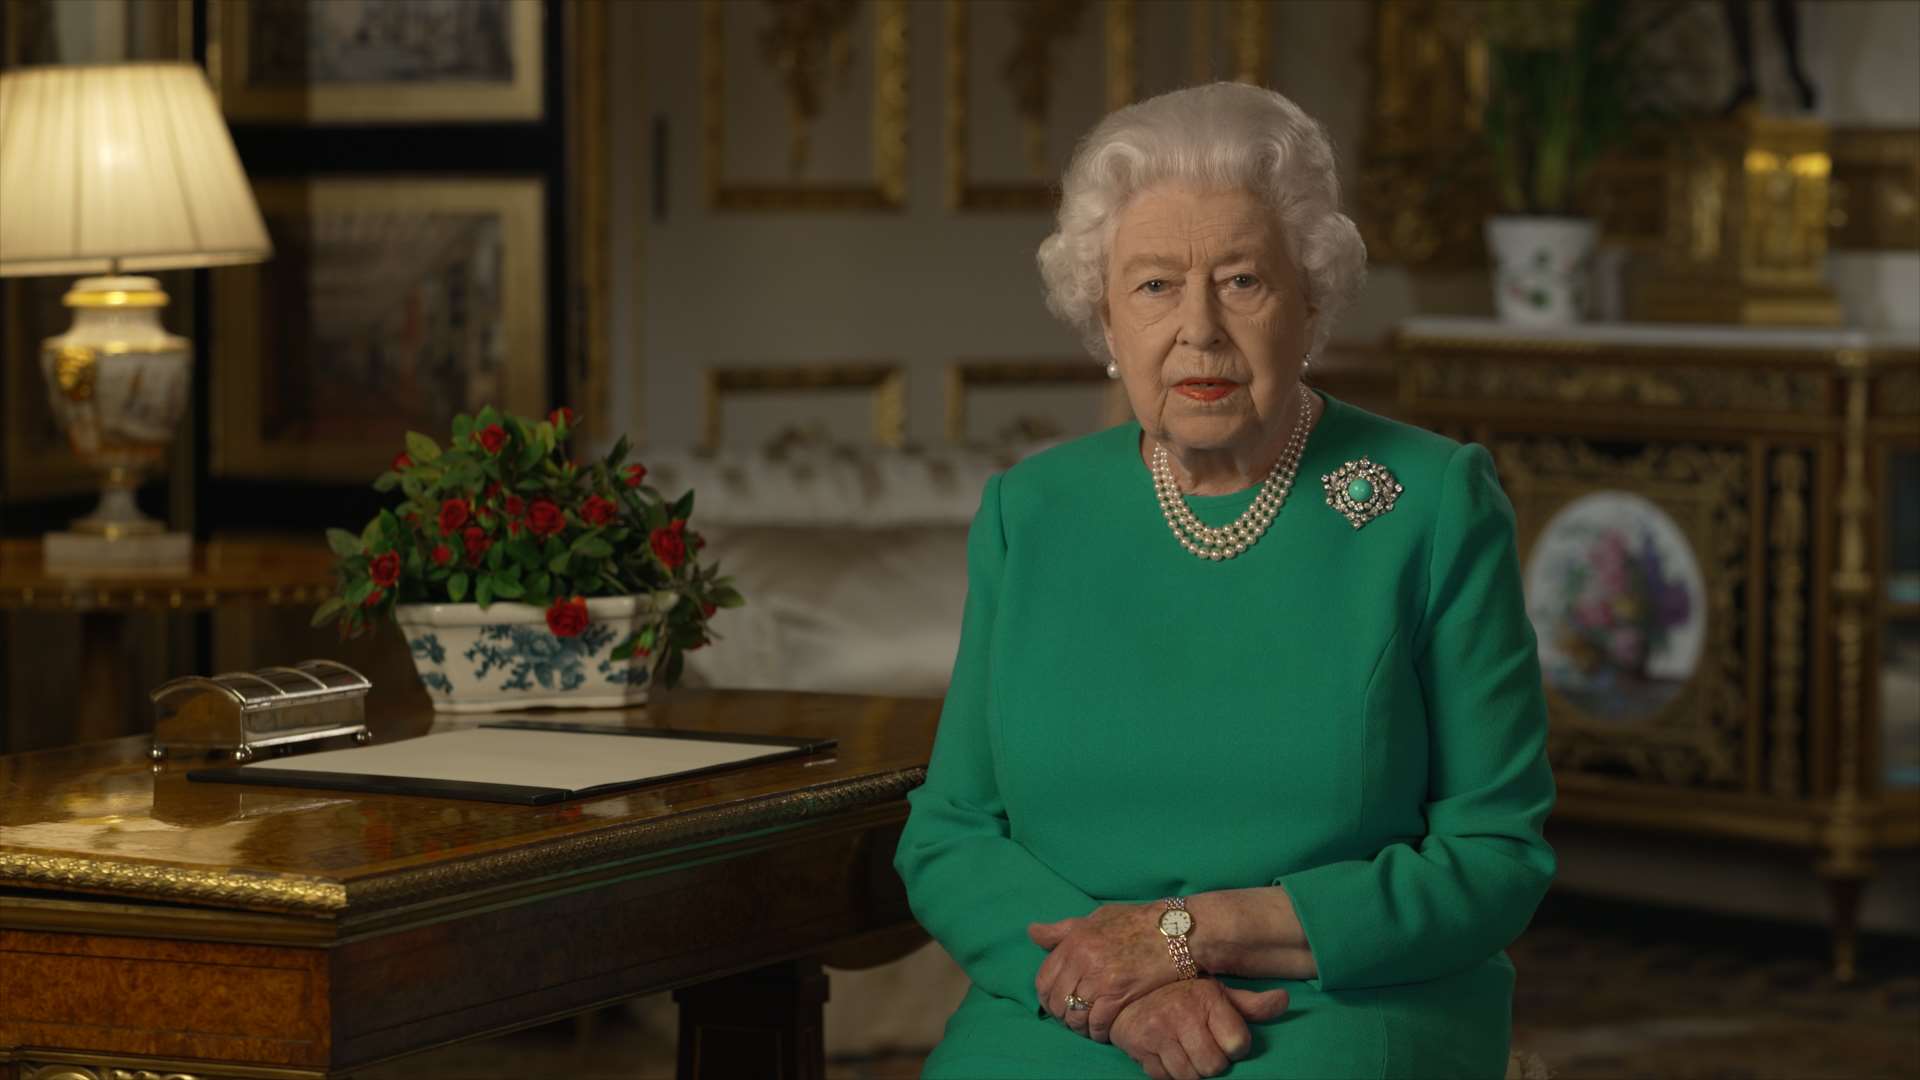 The Queen during her televised address (Buckingham Palace/PA)